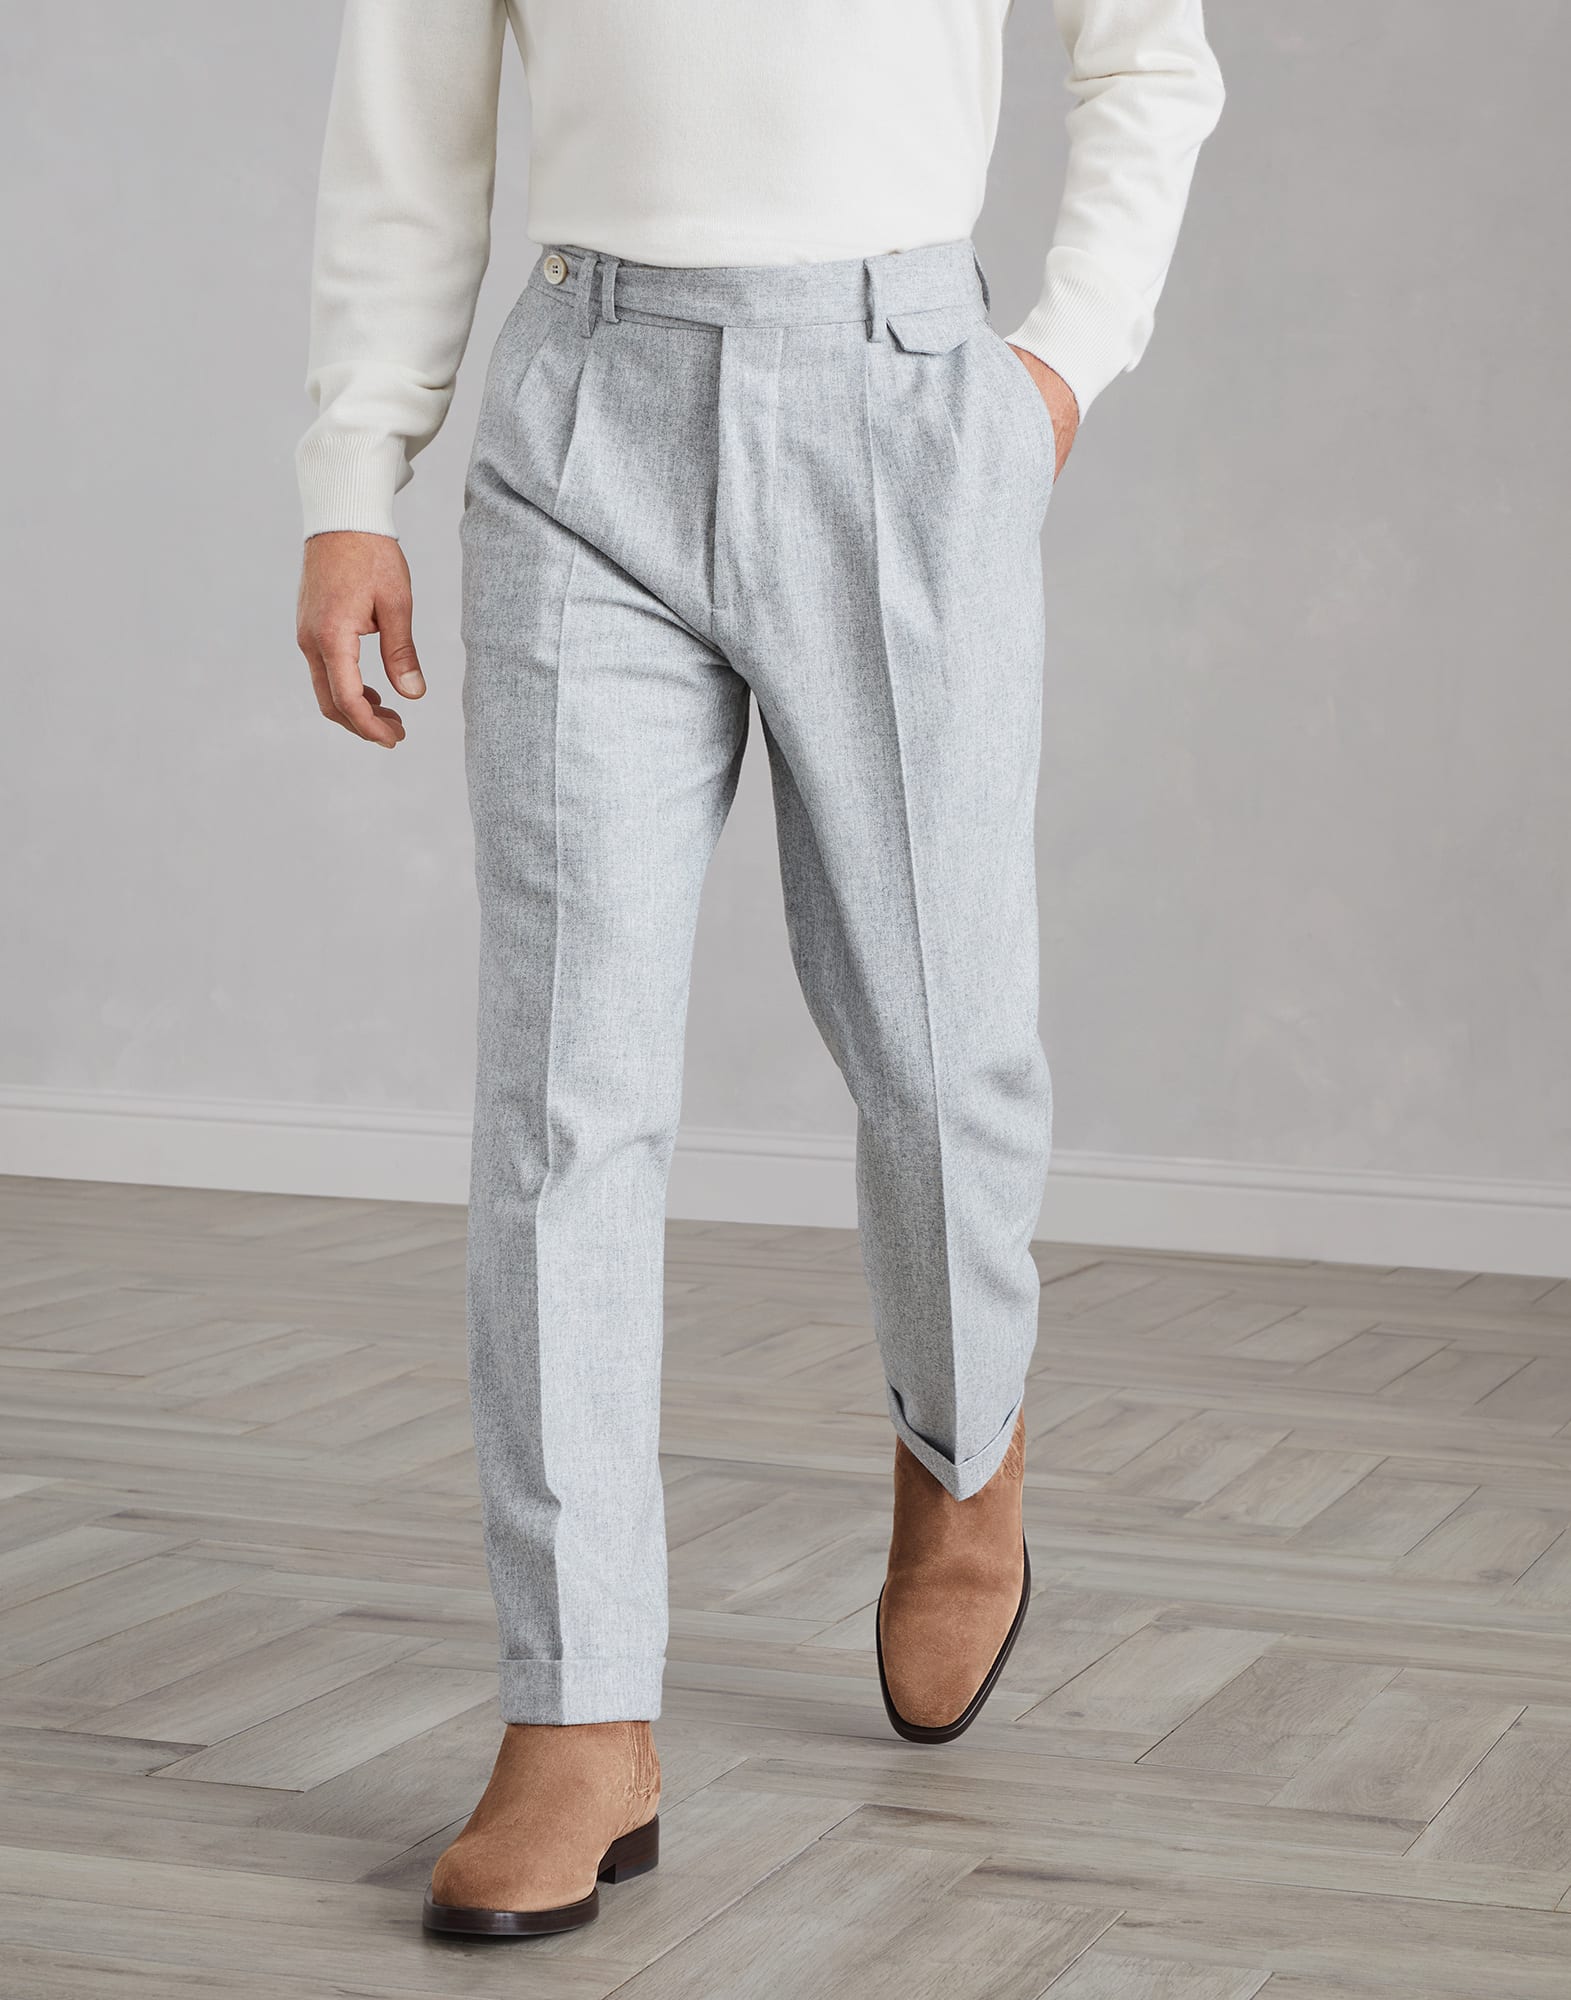 Leisure fit trousers with double pleats